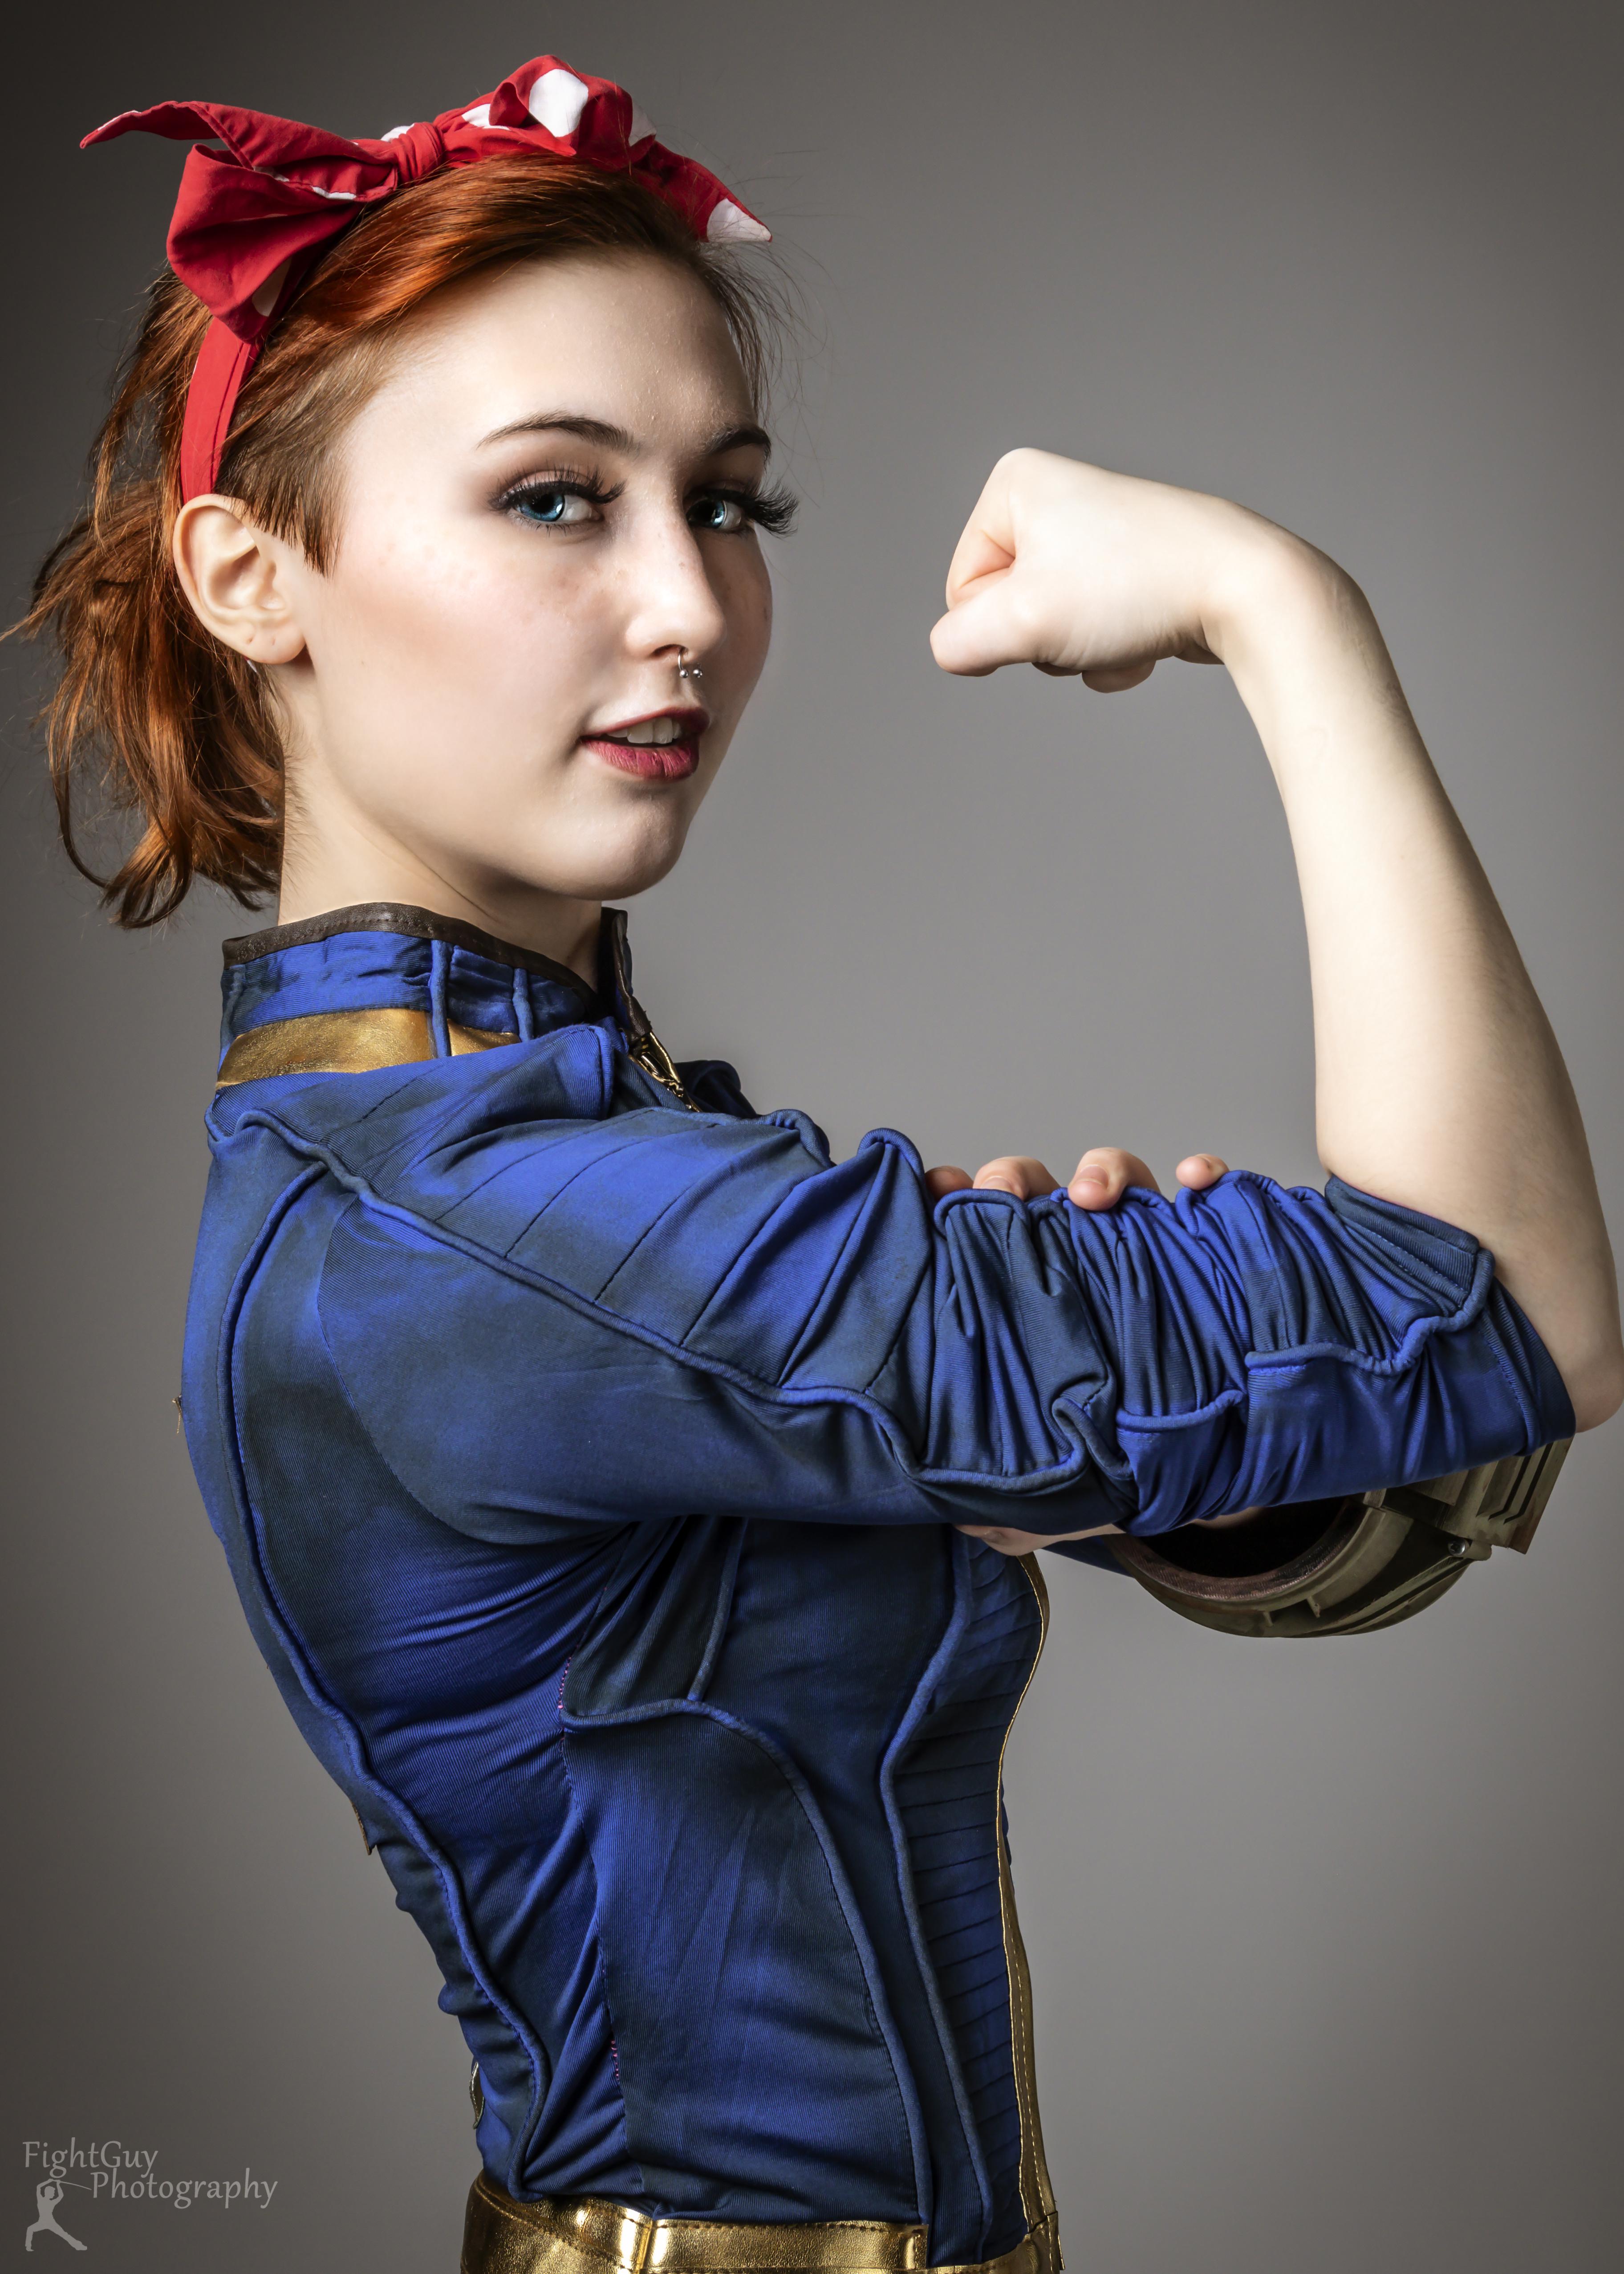 Rosie the riveter meets Fallout